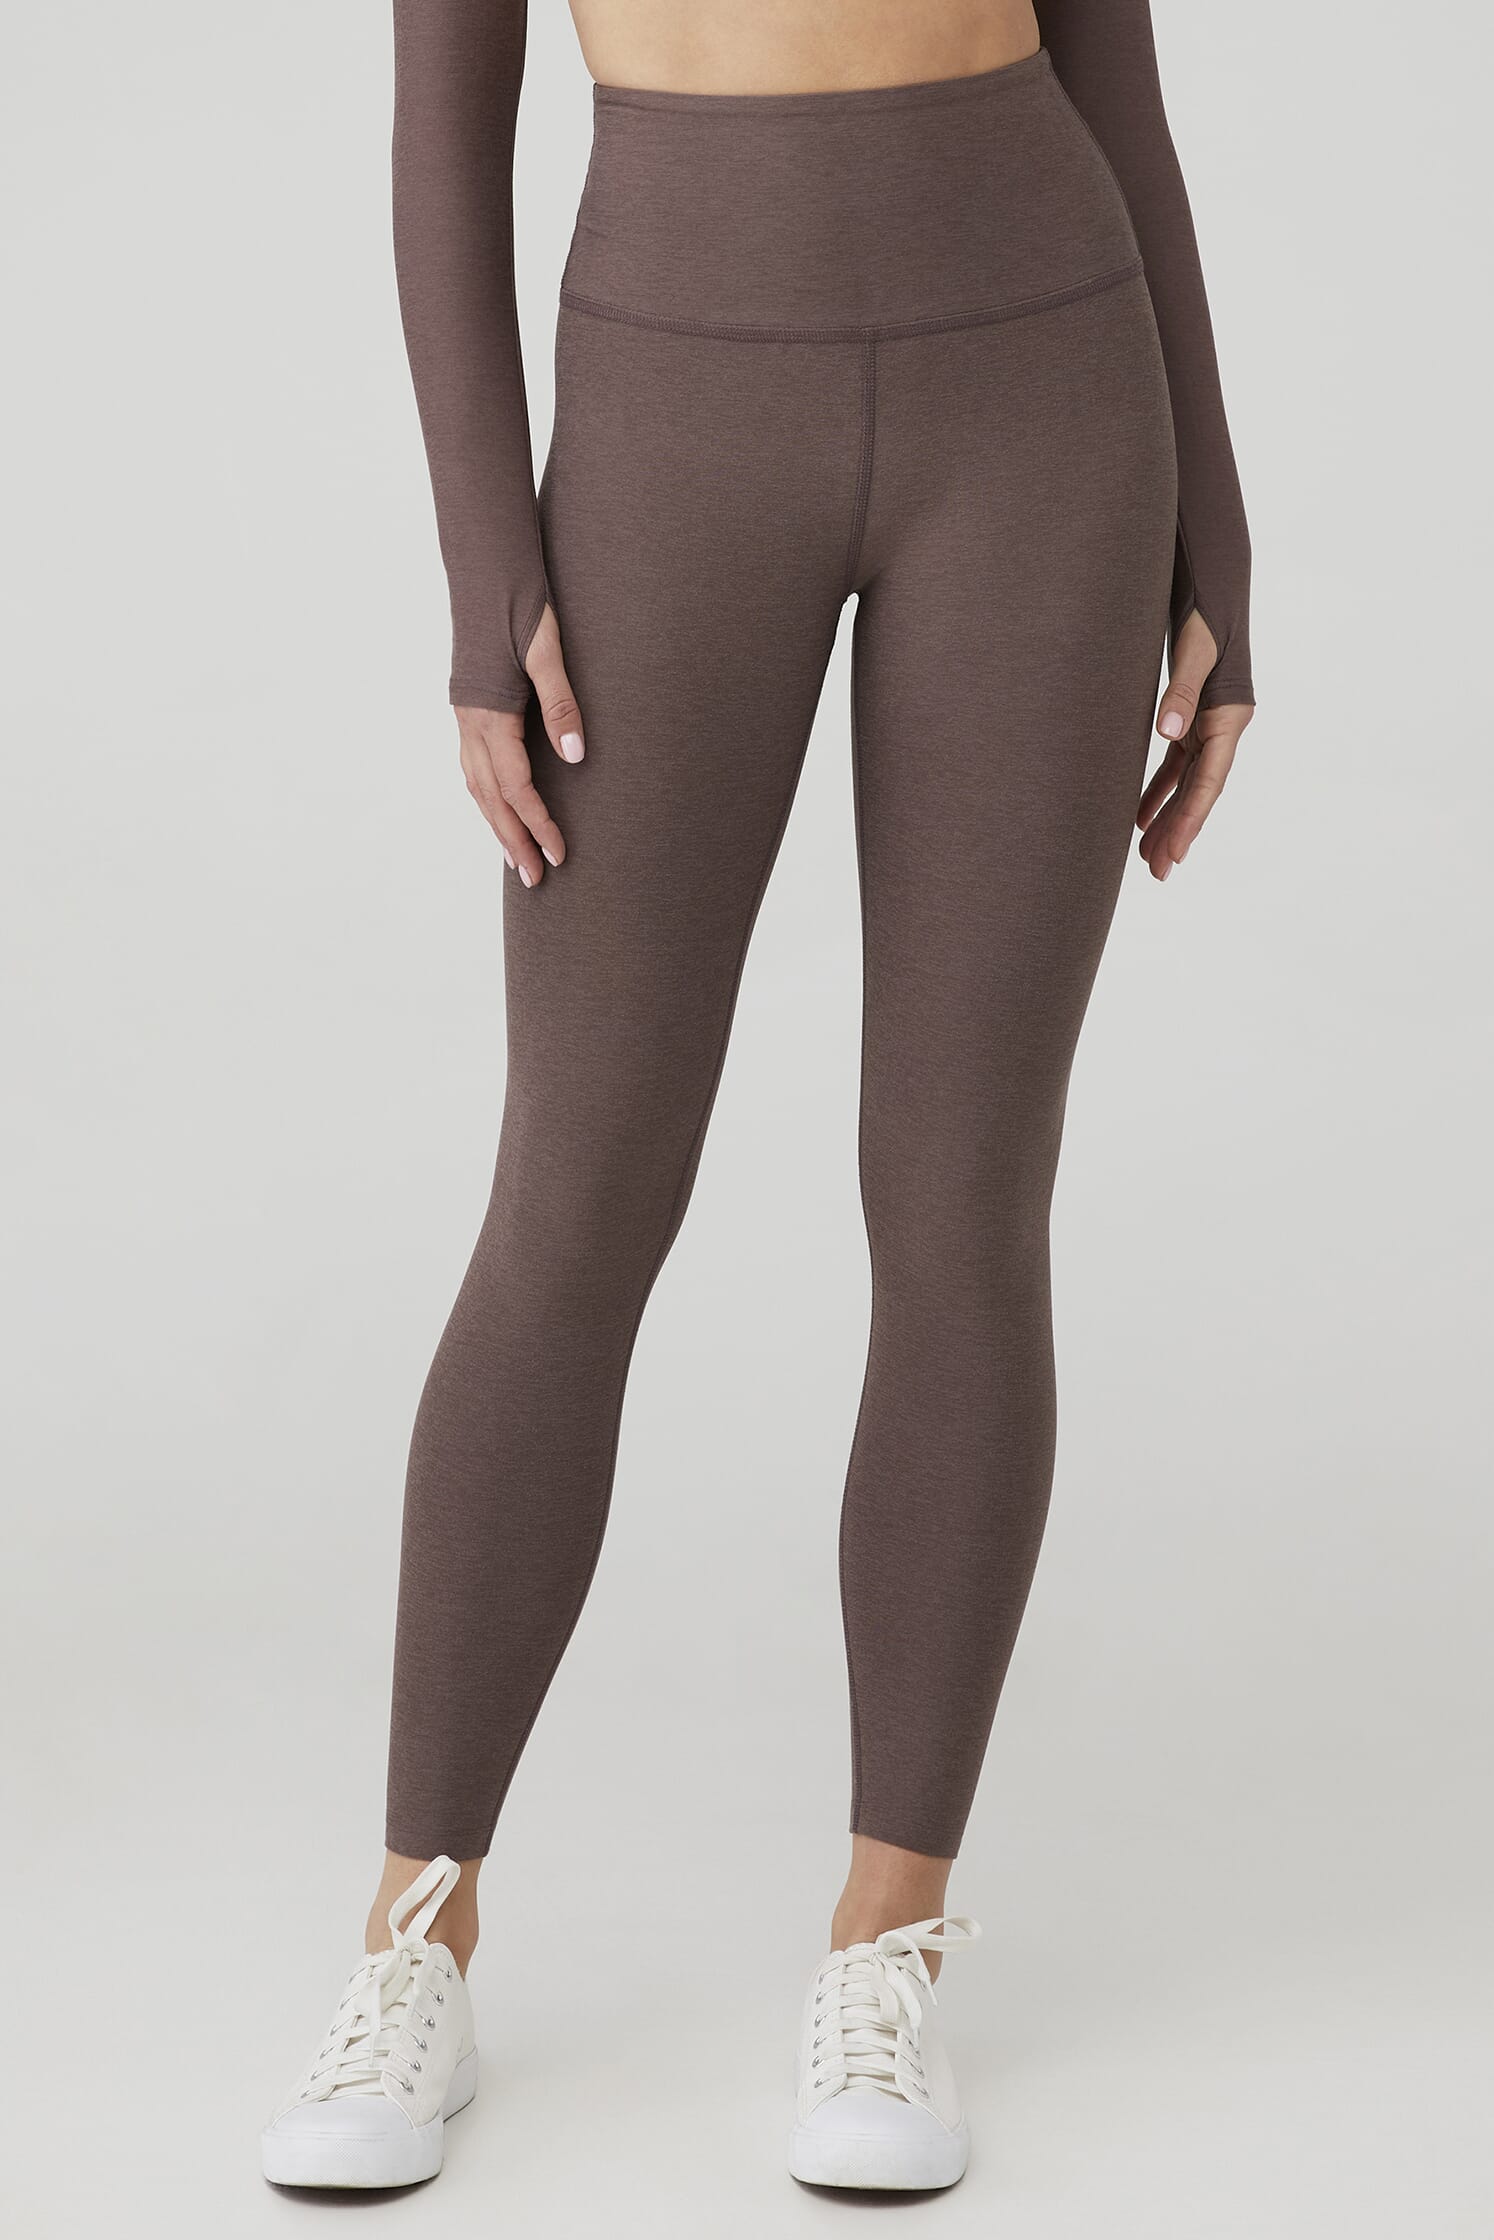 https://images.fashionpass.com/products/spacedye-caught-in-the-midi-high-waisted-legging-2-beyond-yoga-truffle-heather-765-1.jpg?profile=a